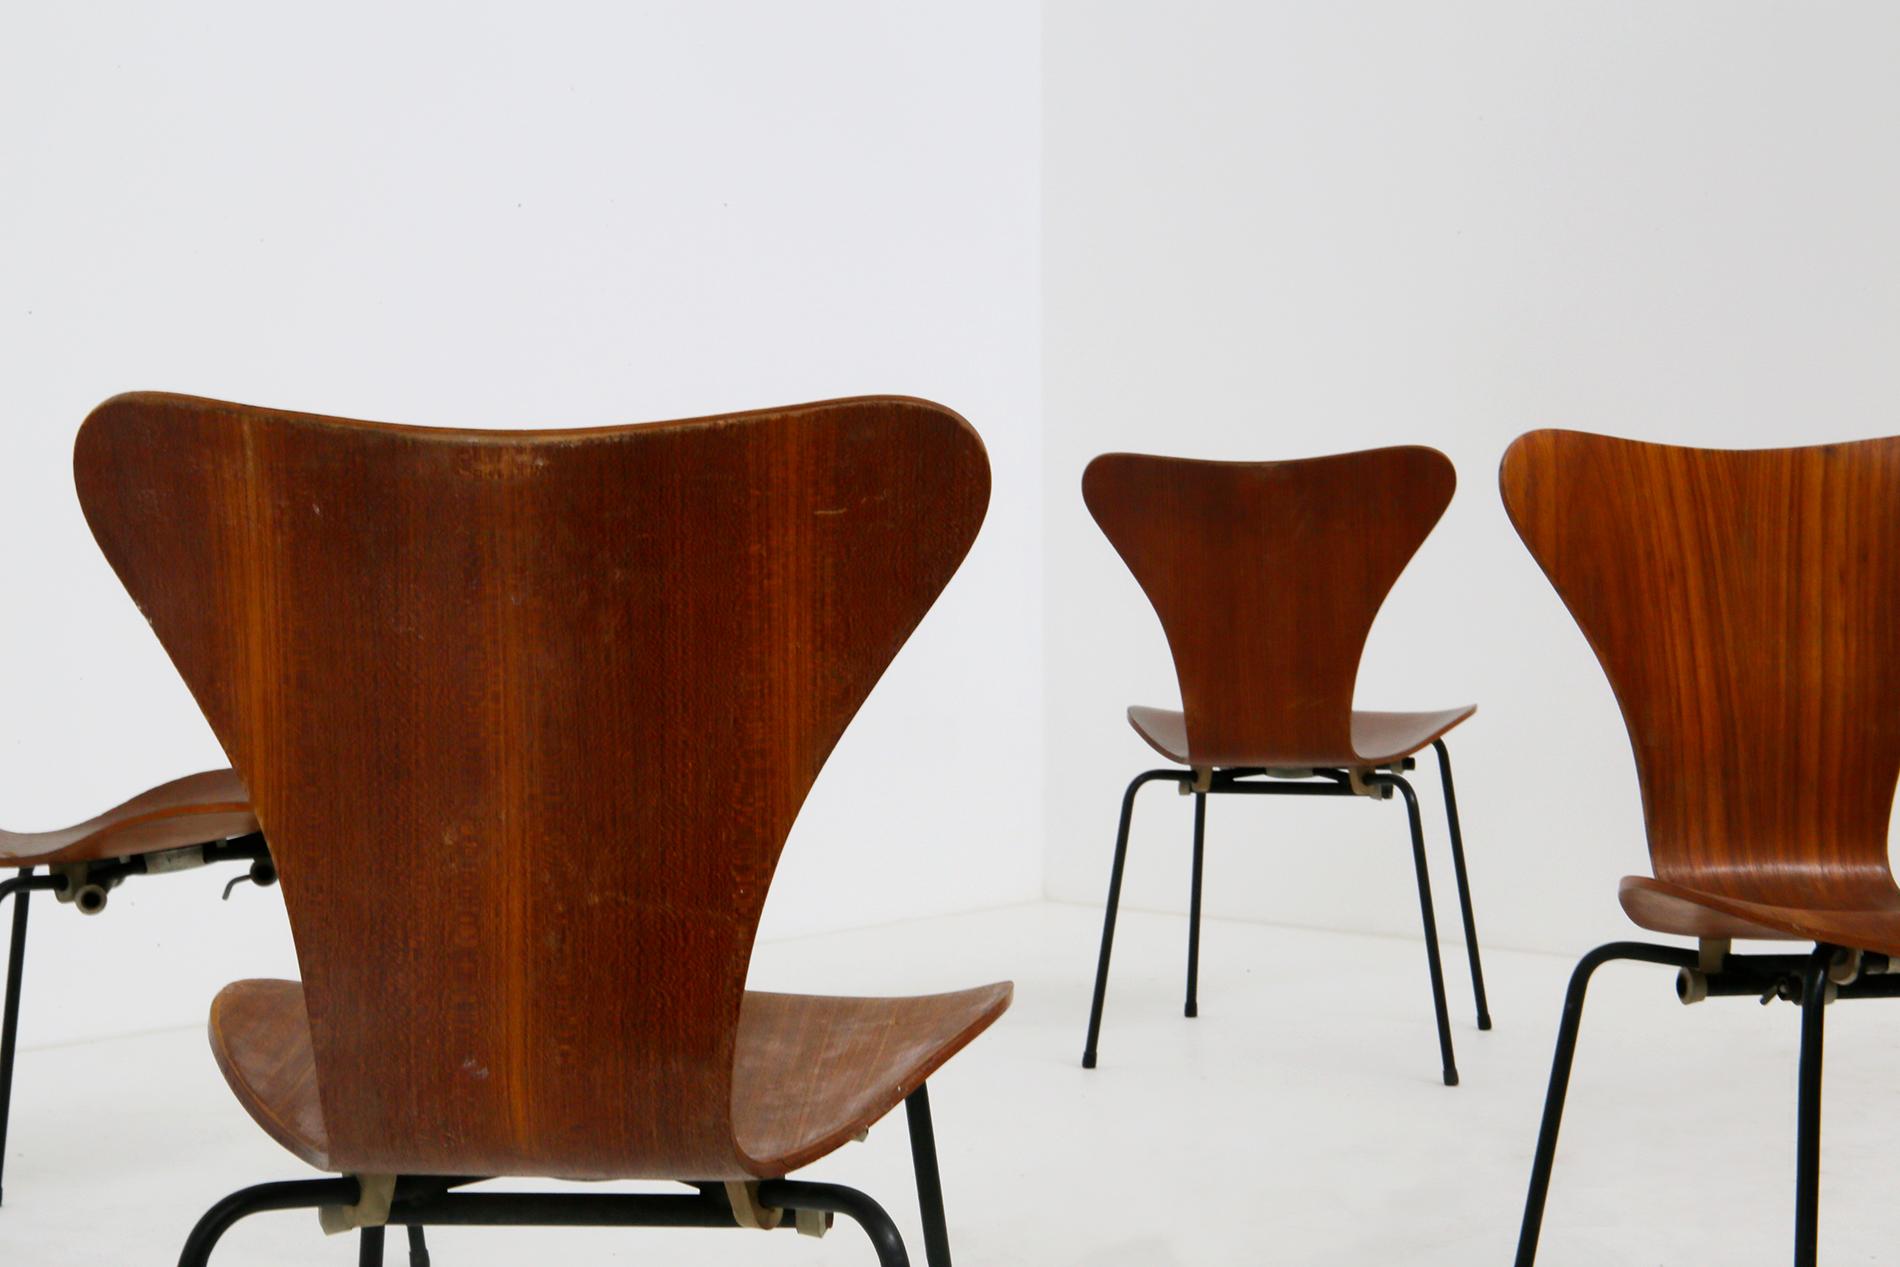 Set composed of chairs designed by Arne Jacobsen for the Brazilian airline Varig in 1950. The model of the chairs is the Butterly. The structure of the chairs is made of painted iron. The seat is made of curved wood. The chairs are called Butterfly